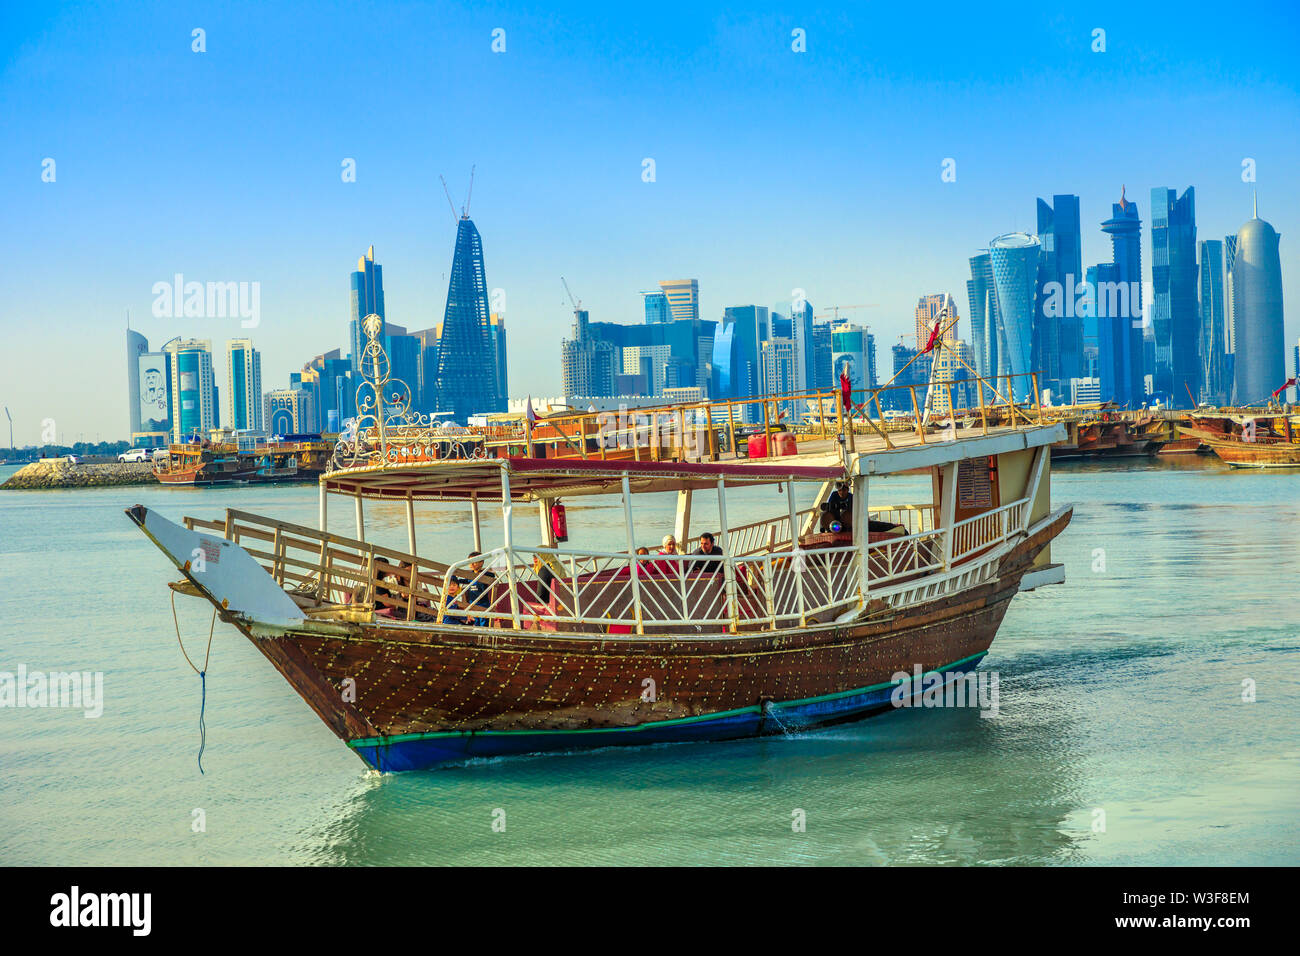 Doha, Qatar - February 23, 2019: people tourists on dhow and seafront of Doha West Bay skyline with Qatar International Exhibition Center, Doha Tower Stock Photo